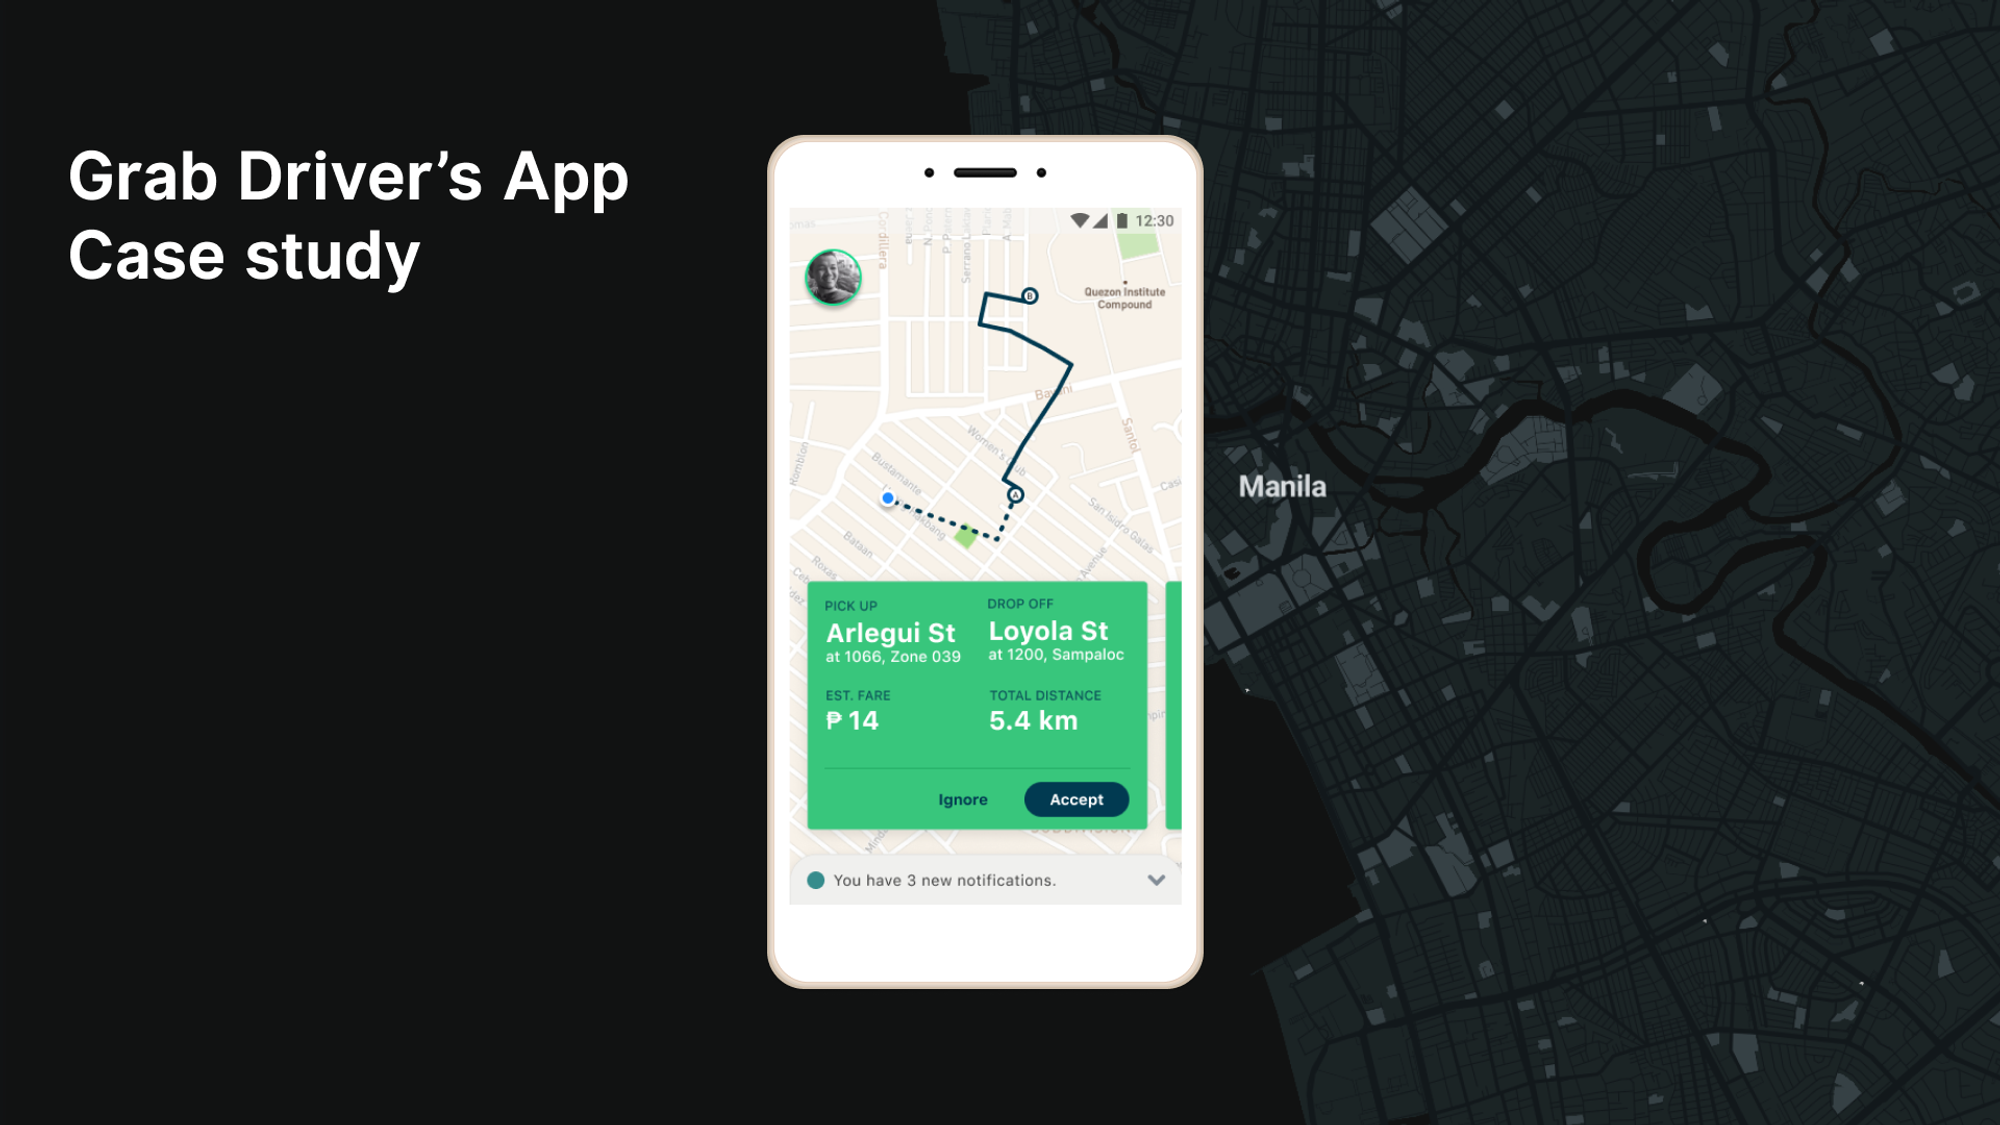 Designing a food delivery app for motorbike drivers - a UX case study